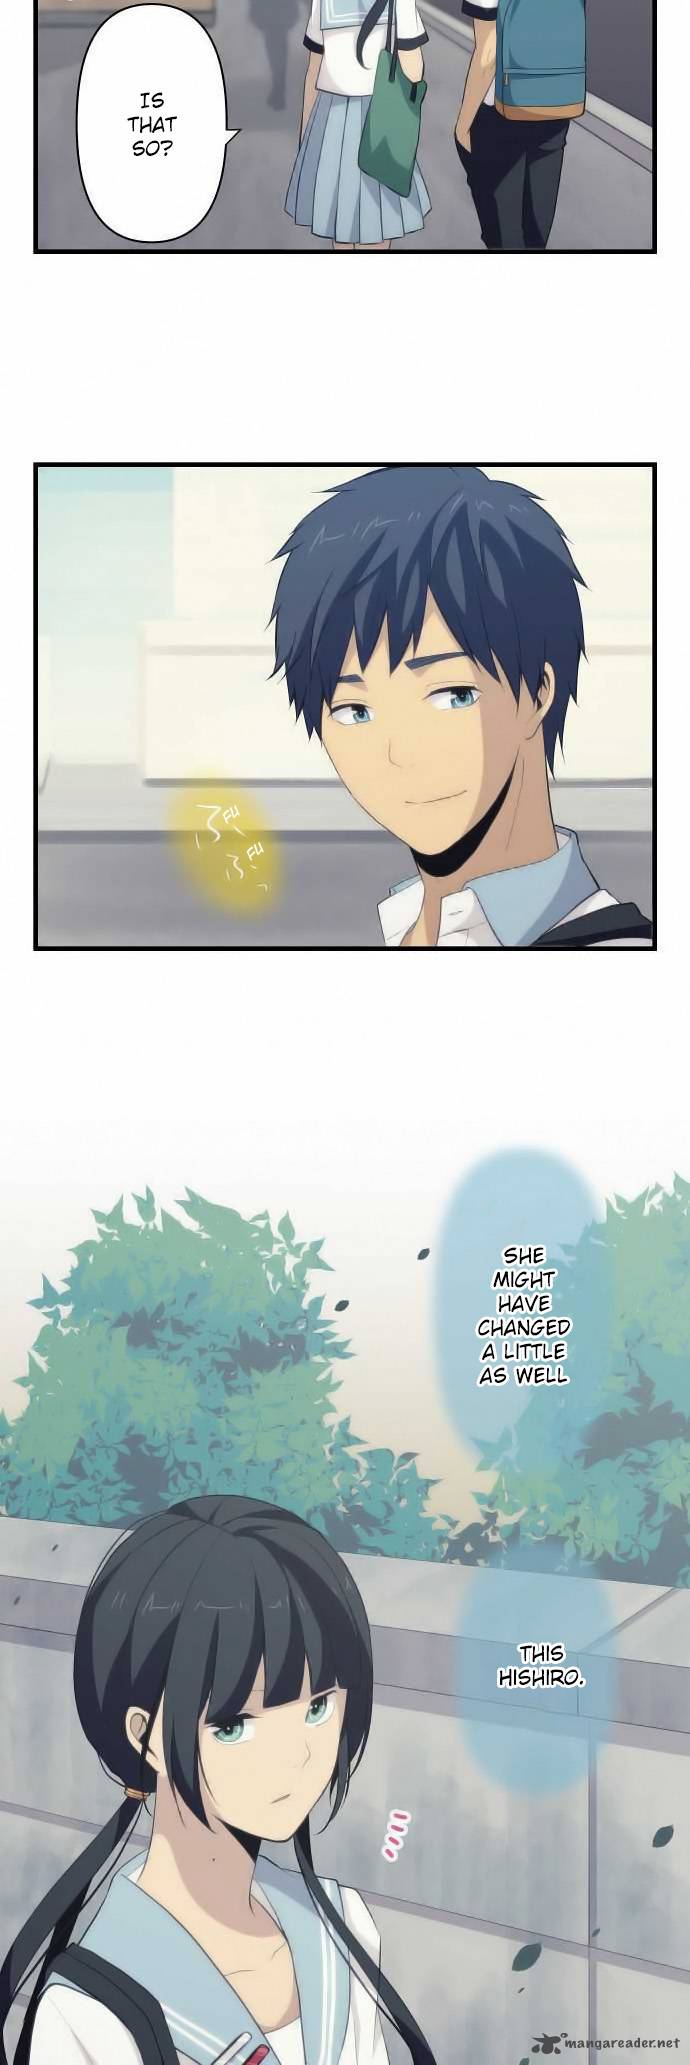 Relife 85 2